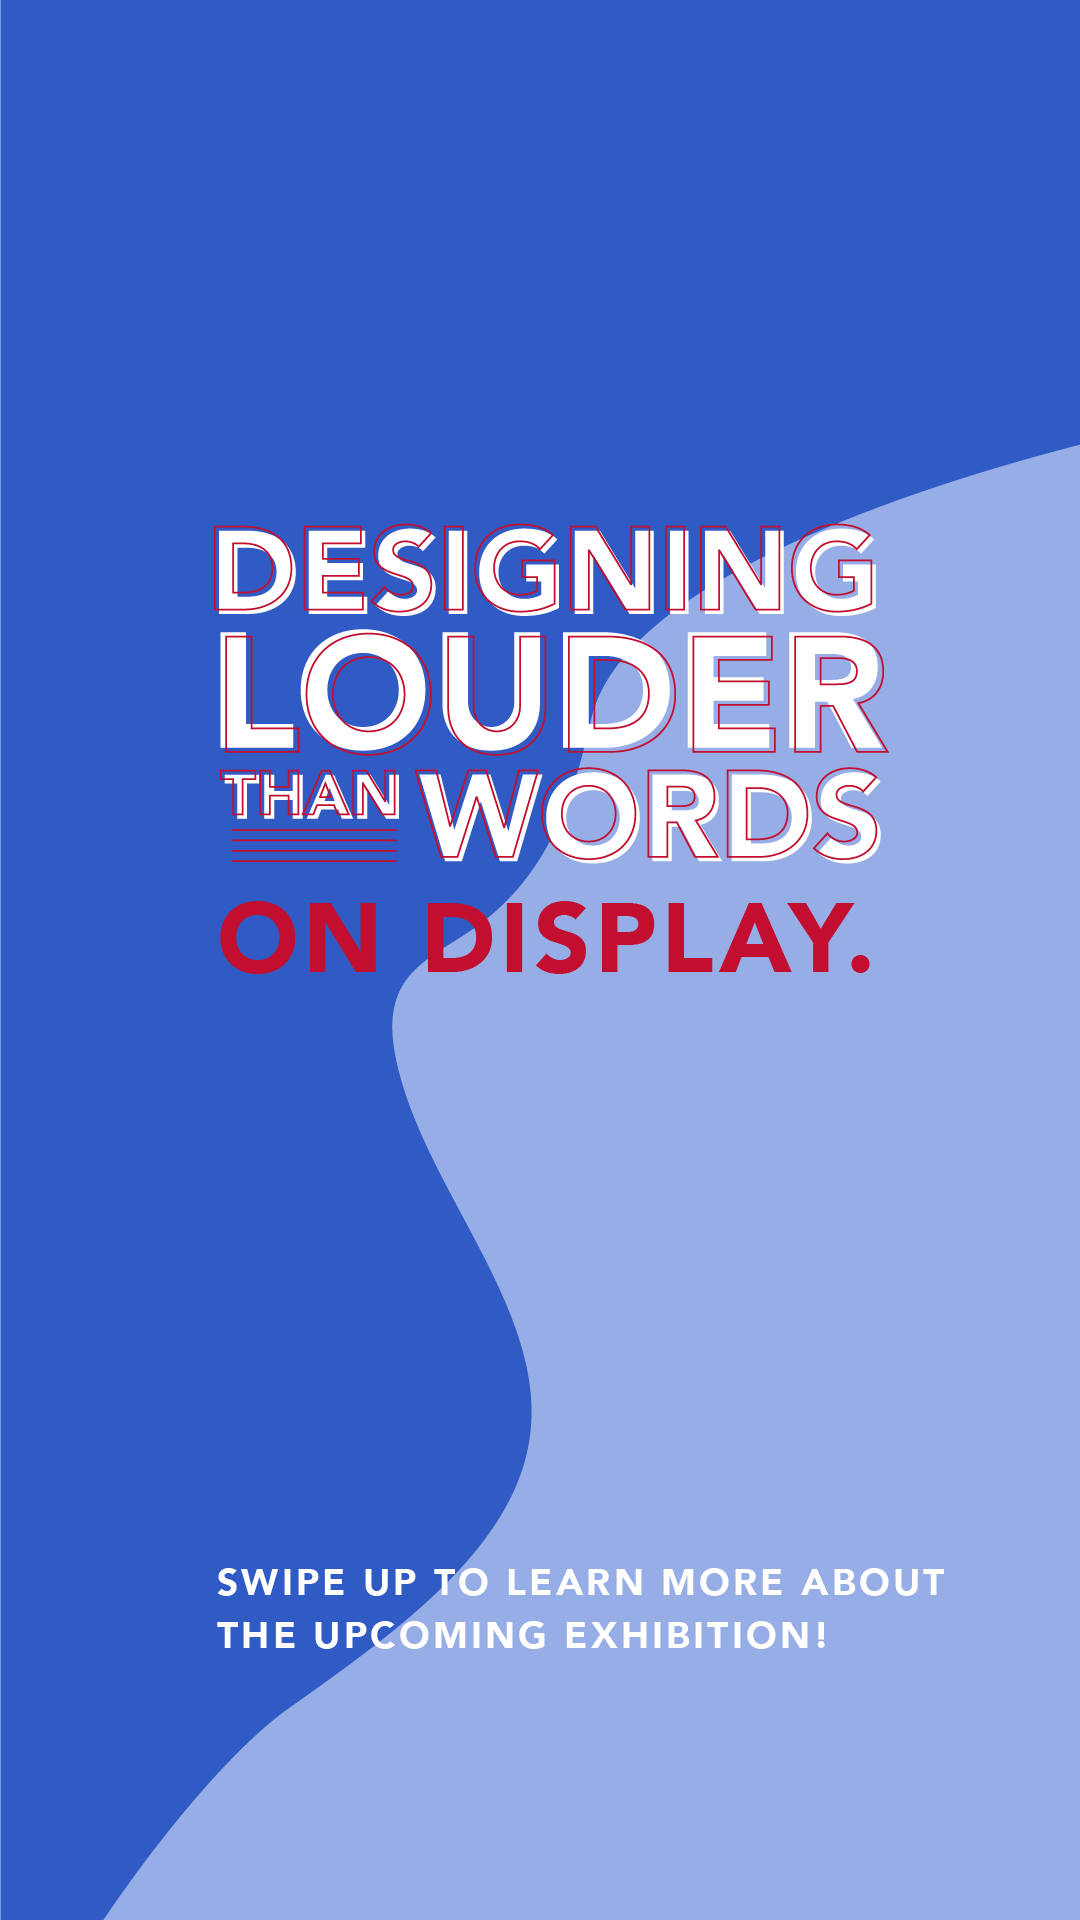  Designing Louder than Words exhibition graphic with abstract cloud shapes of dark and light blue. 